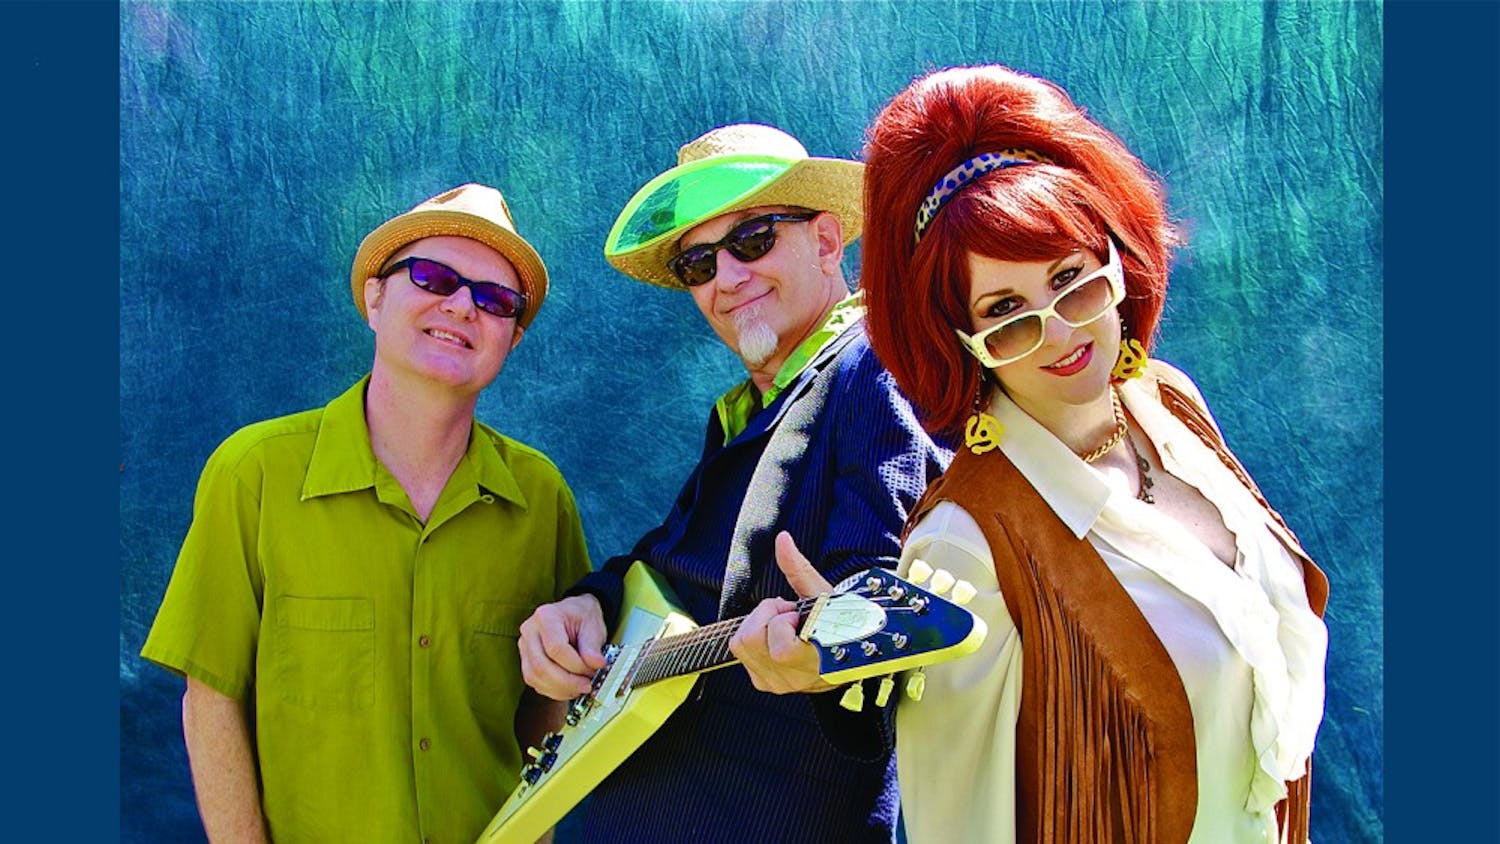 (Left) Dave Hartman (Drums), Rick Miller (Guitar/Vocals), and Mary Huff (Bass/Vocals) are Southern Culture on the Skids.